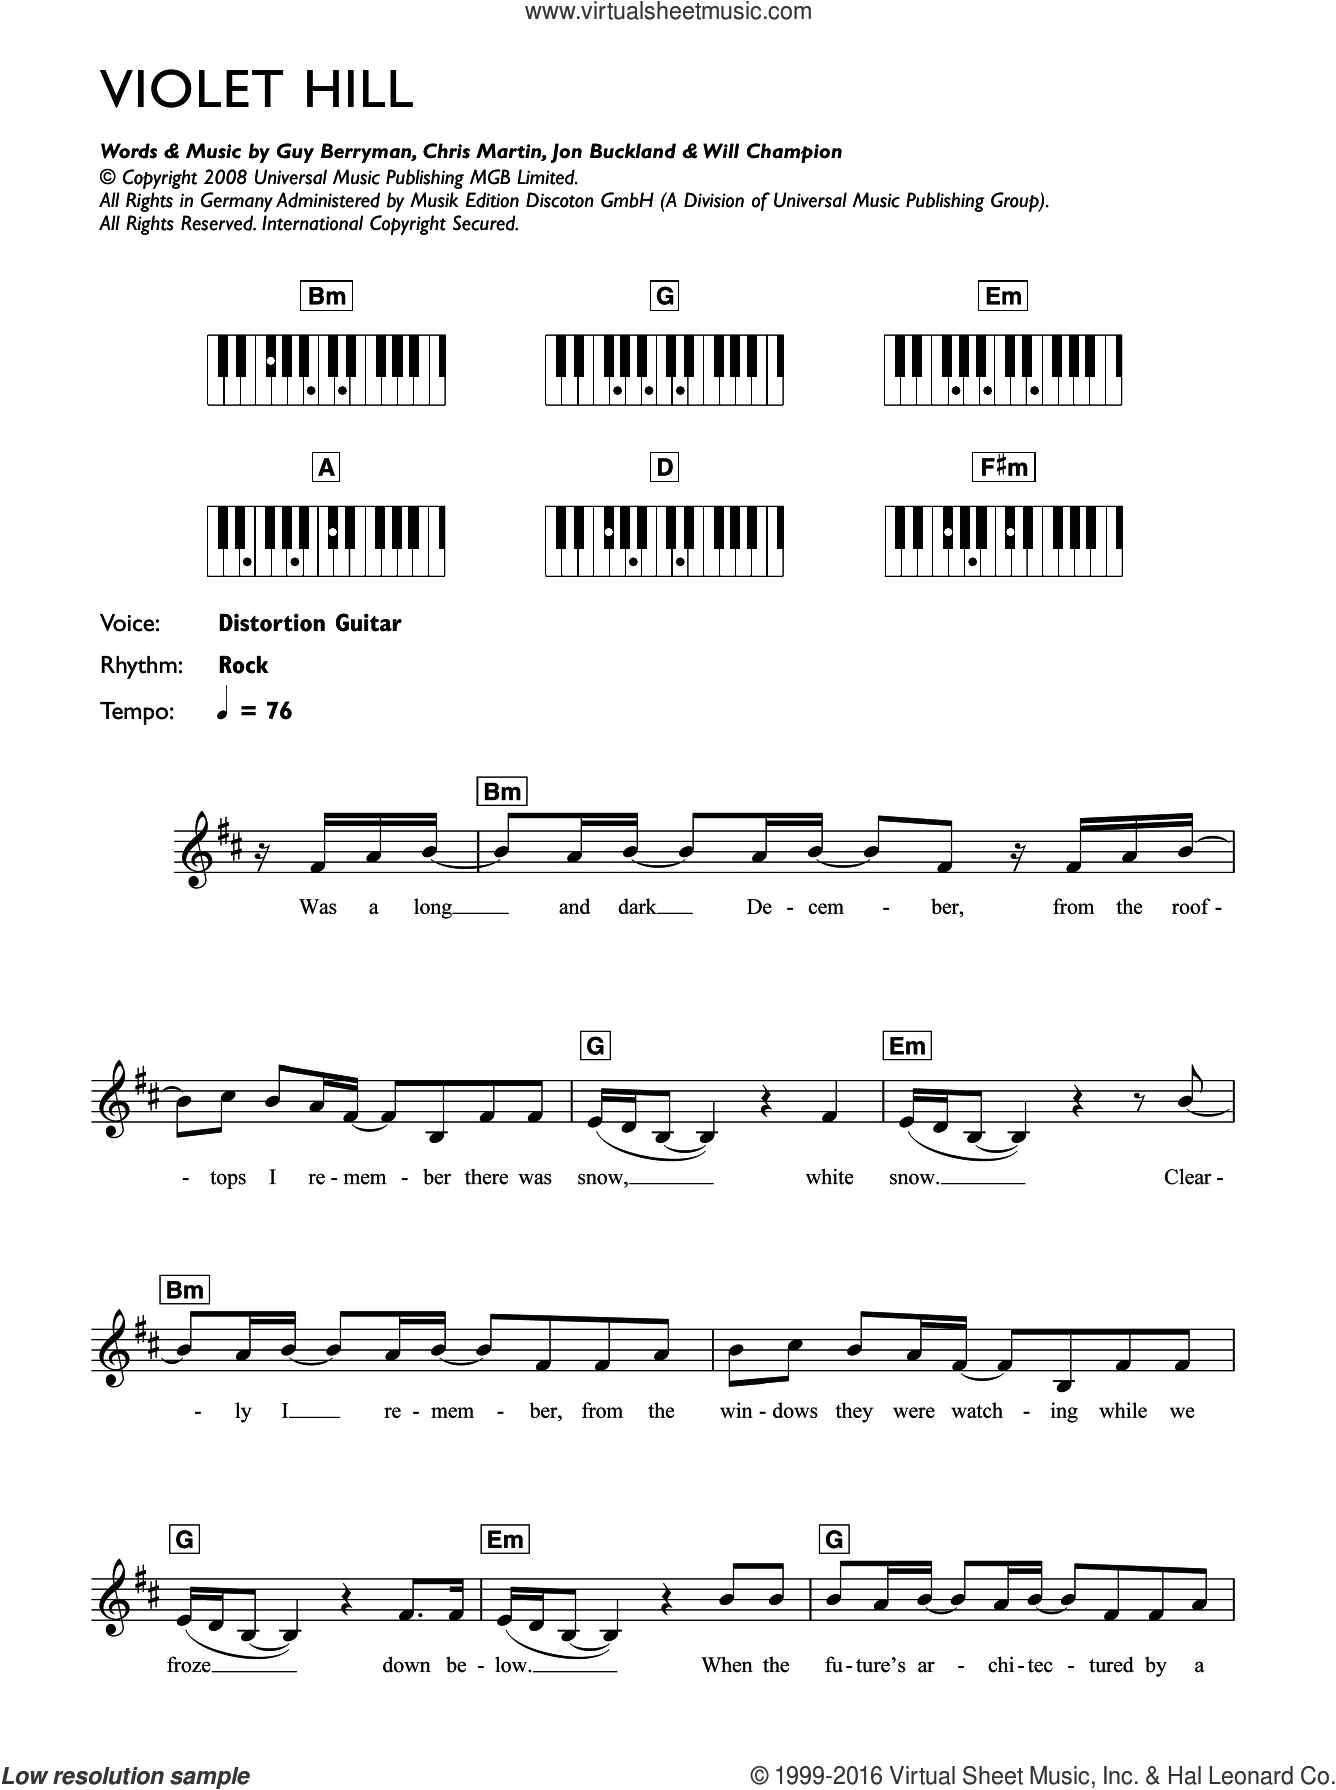 Coldplay - Violet Hill sheet music (intermediate) for piano solo